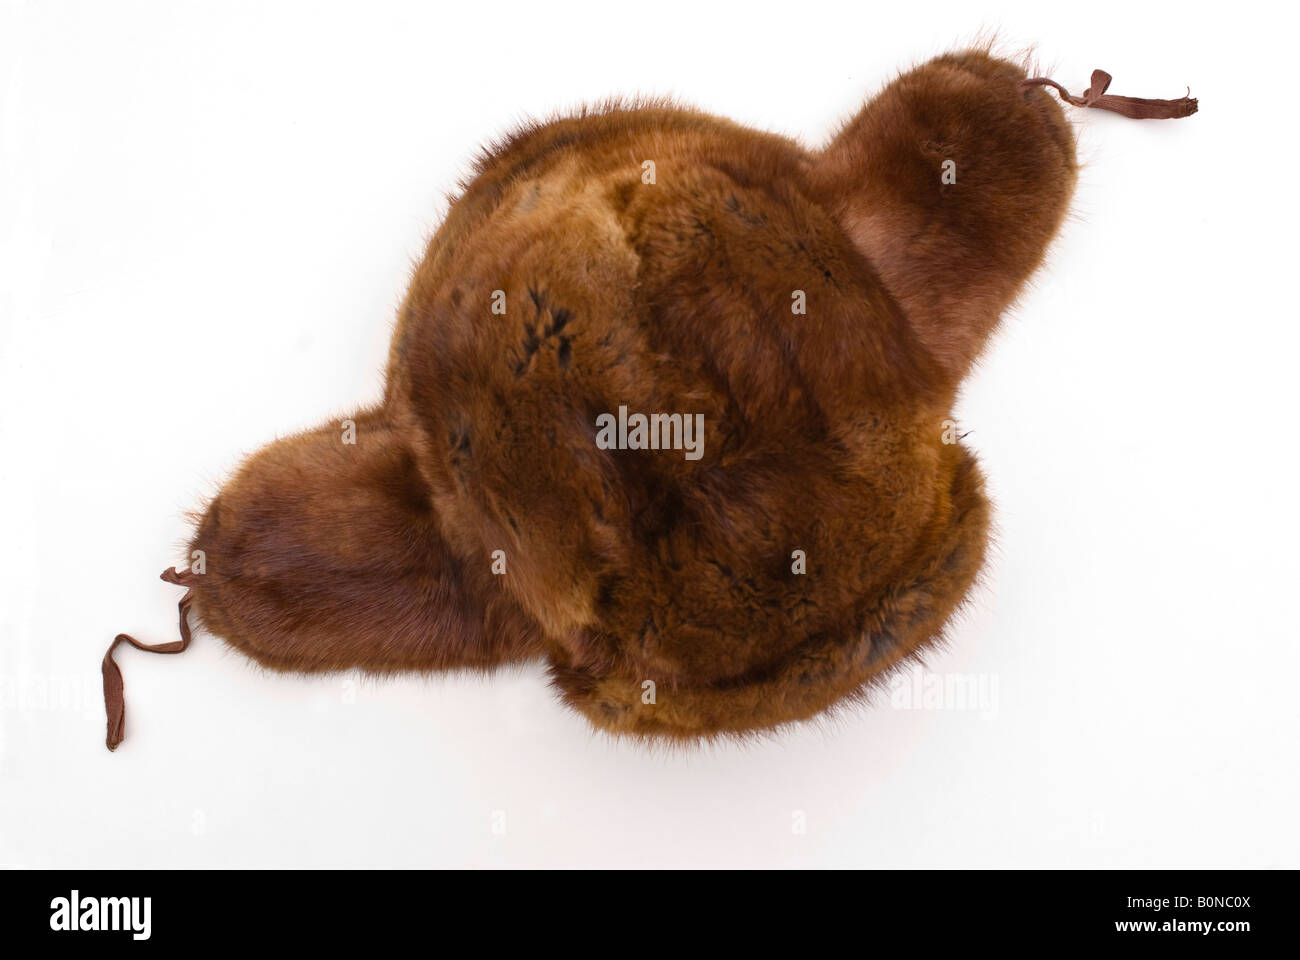 Genuine Russian fur hat 1965. Top view of a Russian fur hat or shapka with ear flaps extended Stock Photo